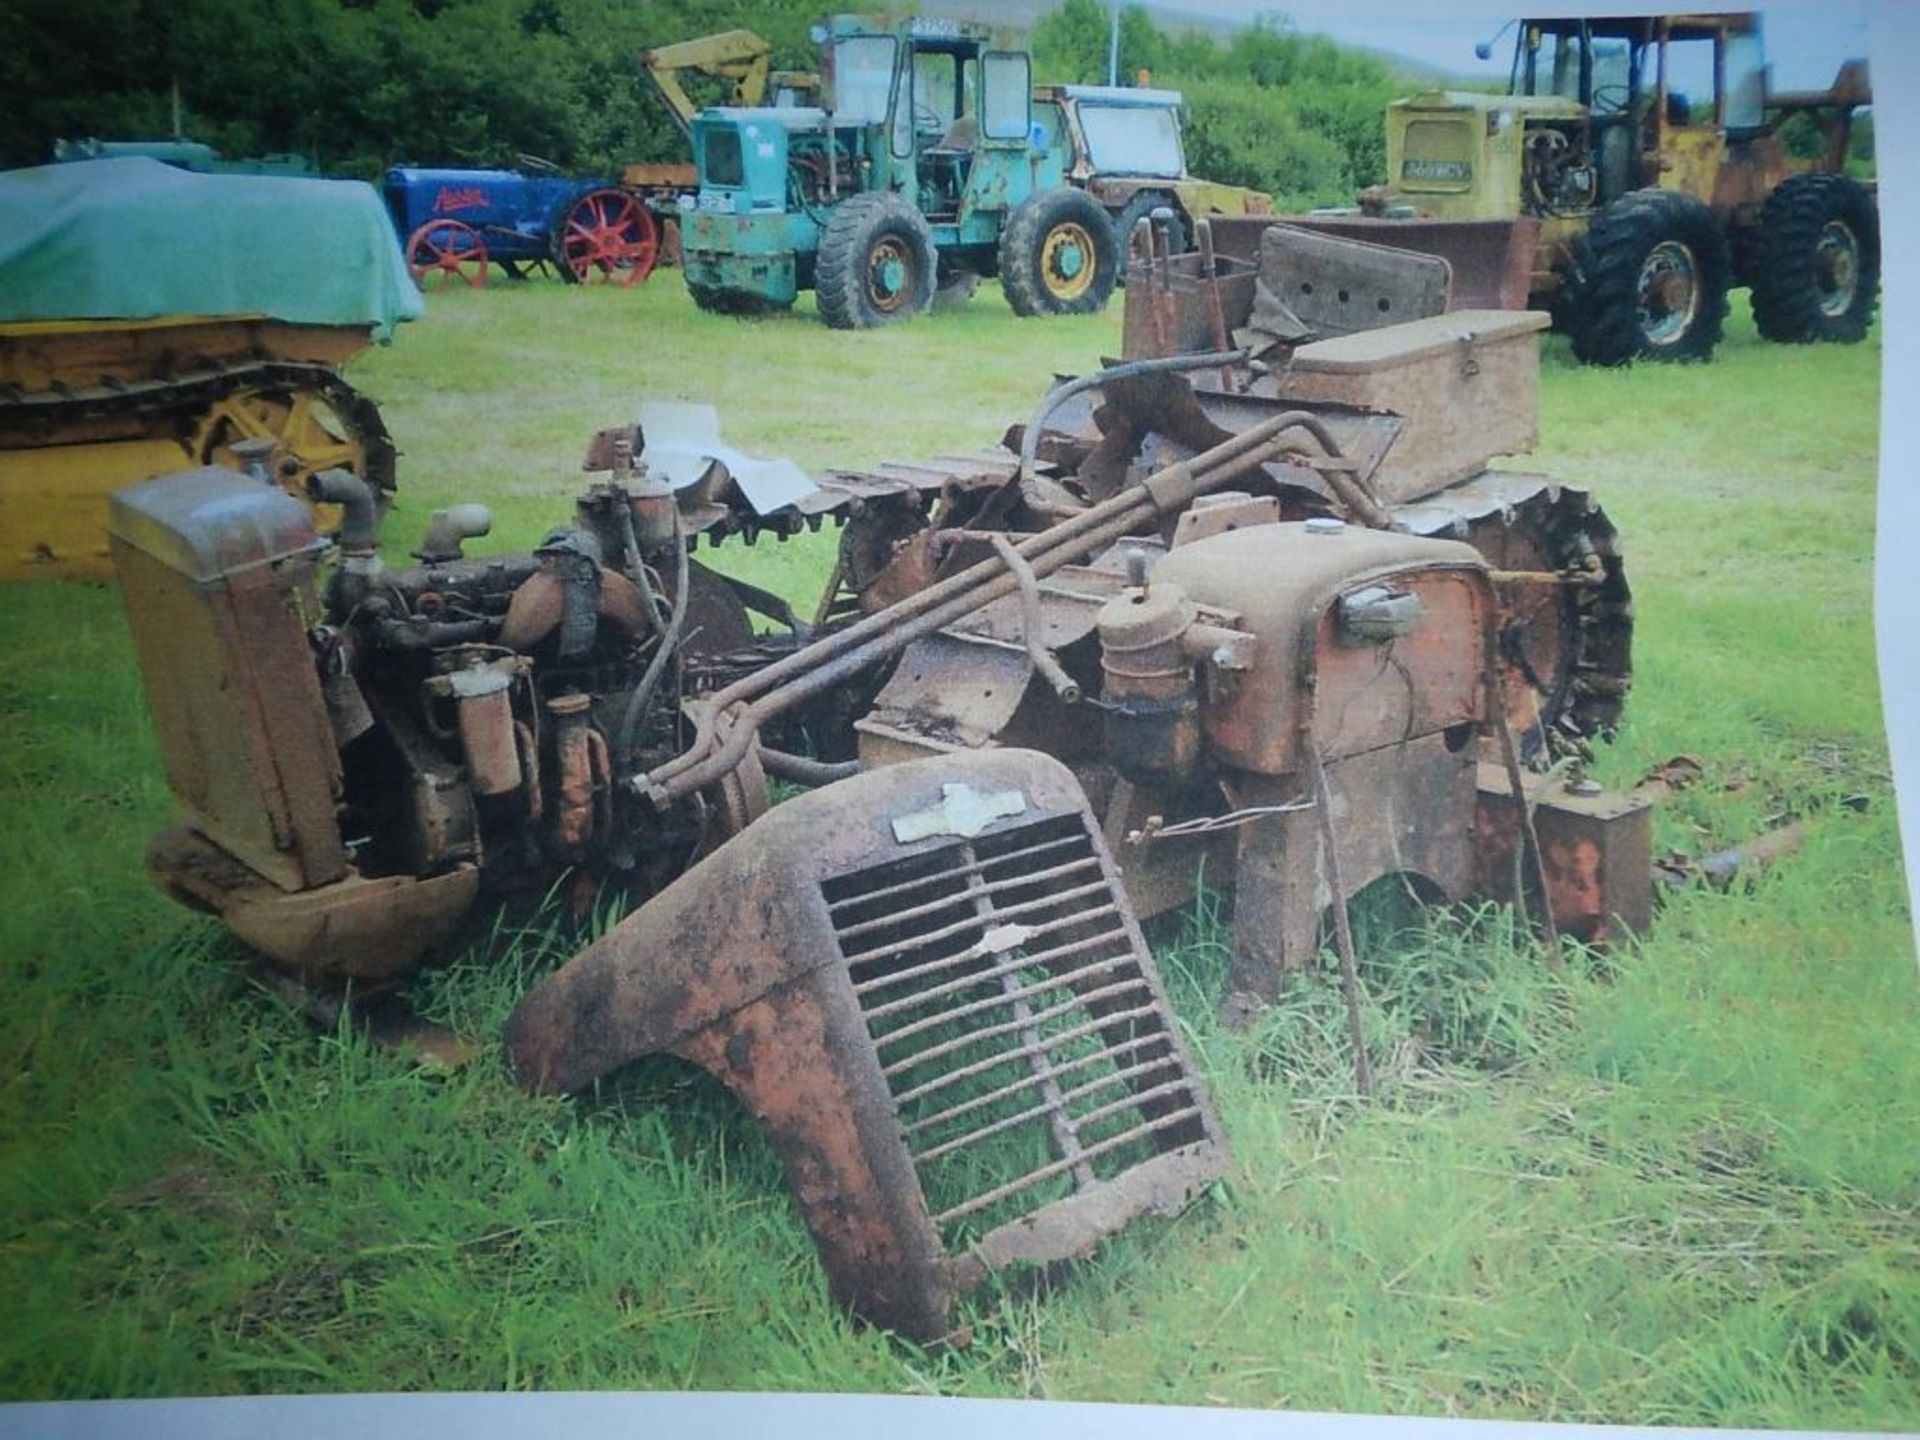 HOWARD Platypus 30/PD2 diesel CRAWLER TRACTOR Dismantled with front dozer blade